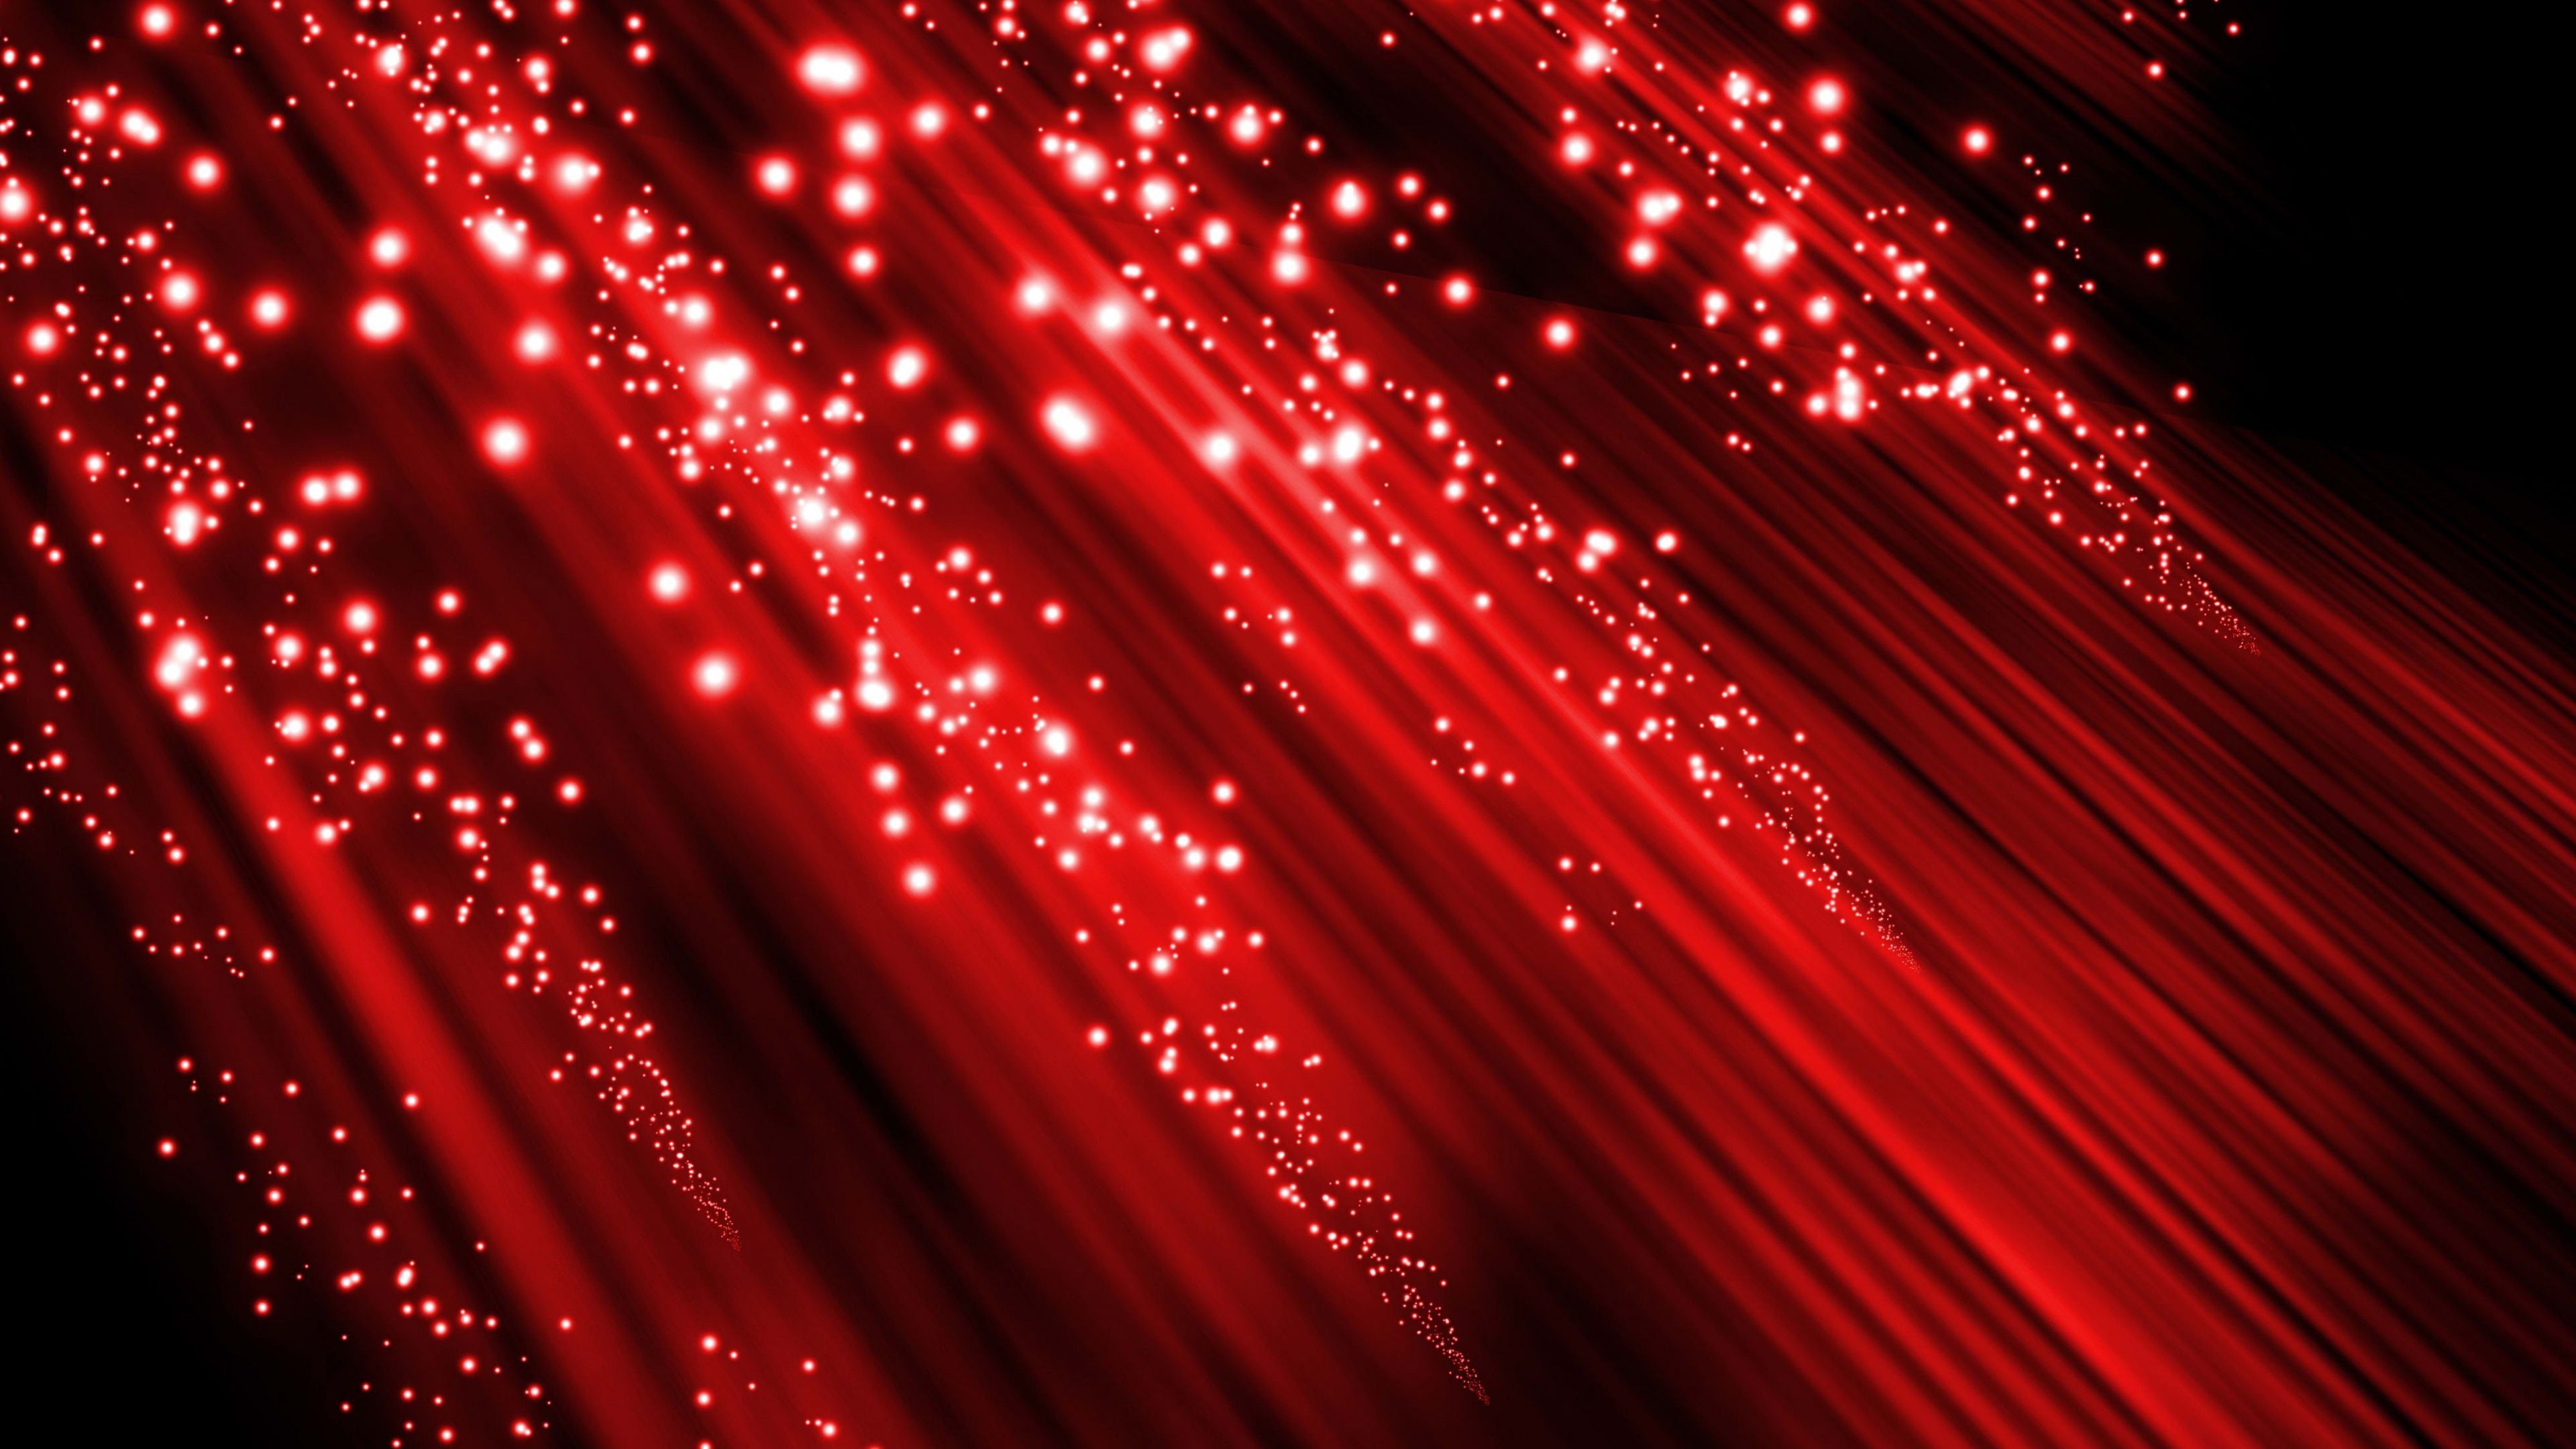 Red Radiating Lines With Glitters And Black On Sides 4K HD Red Aesthetic Wallpaper